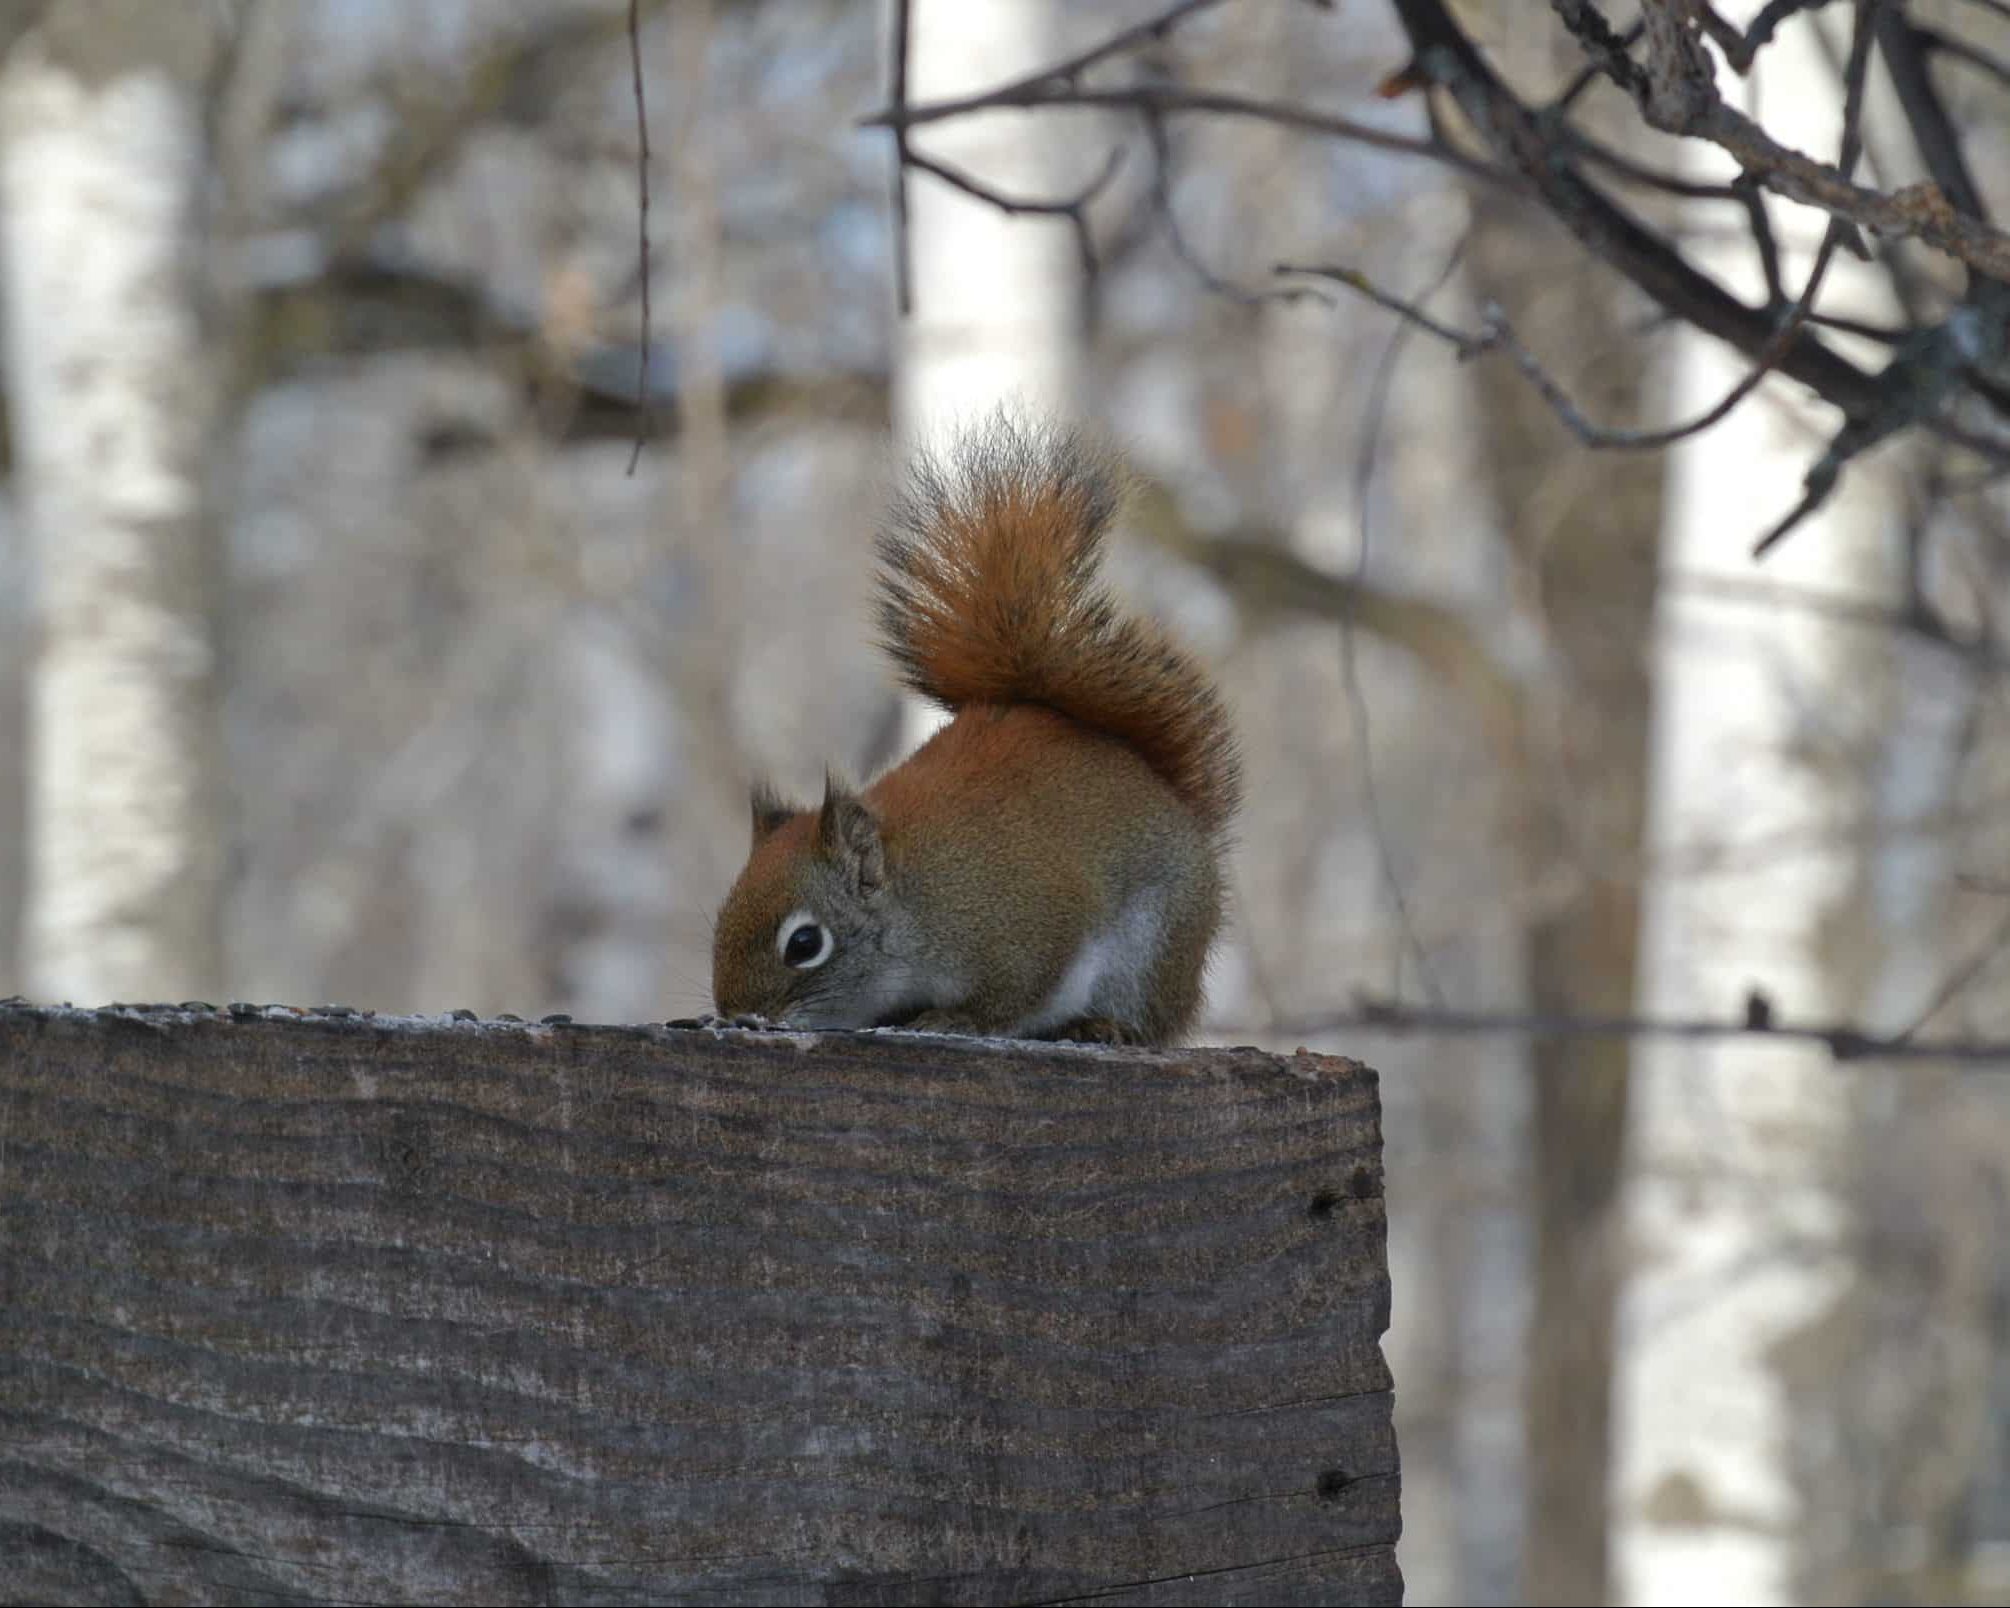 Red squirrel bent down searching for food on railing.